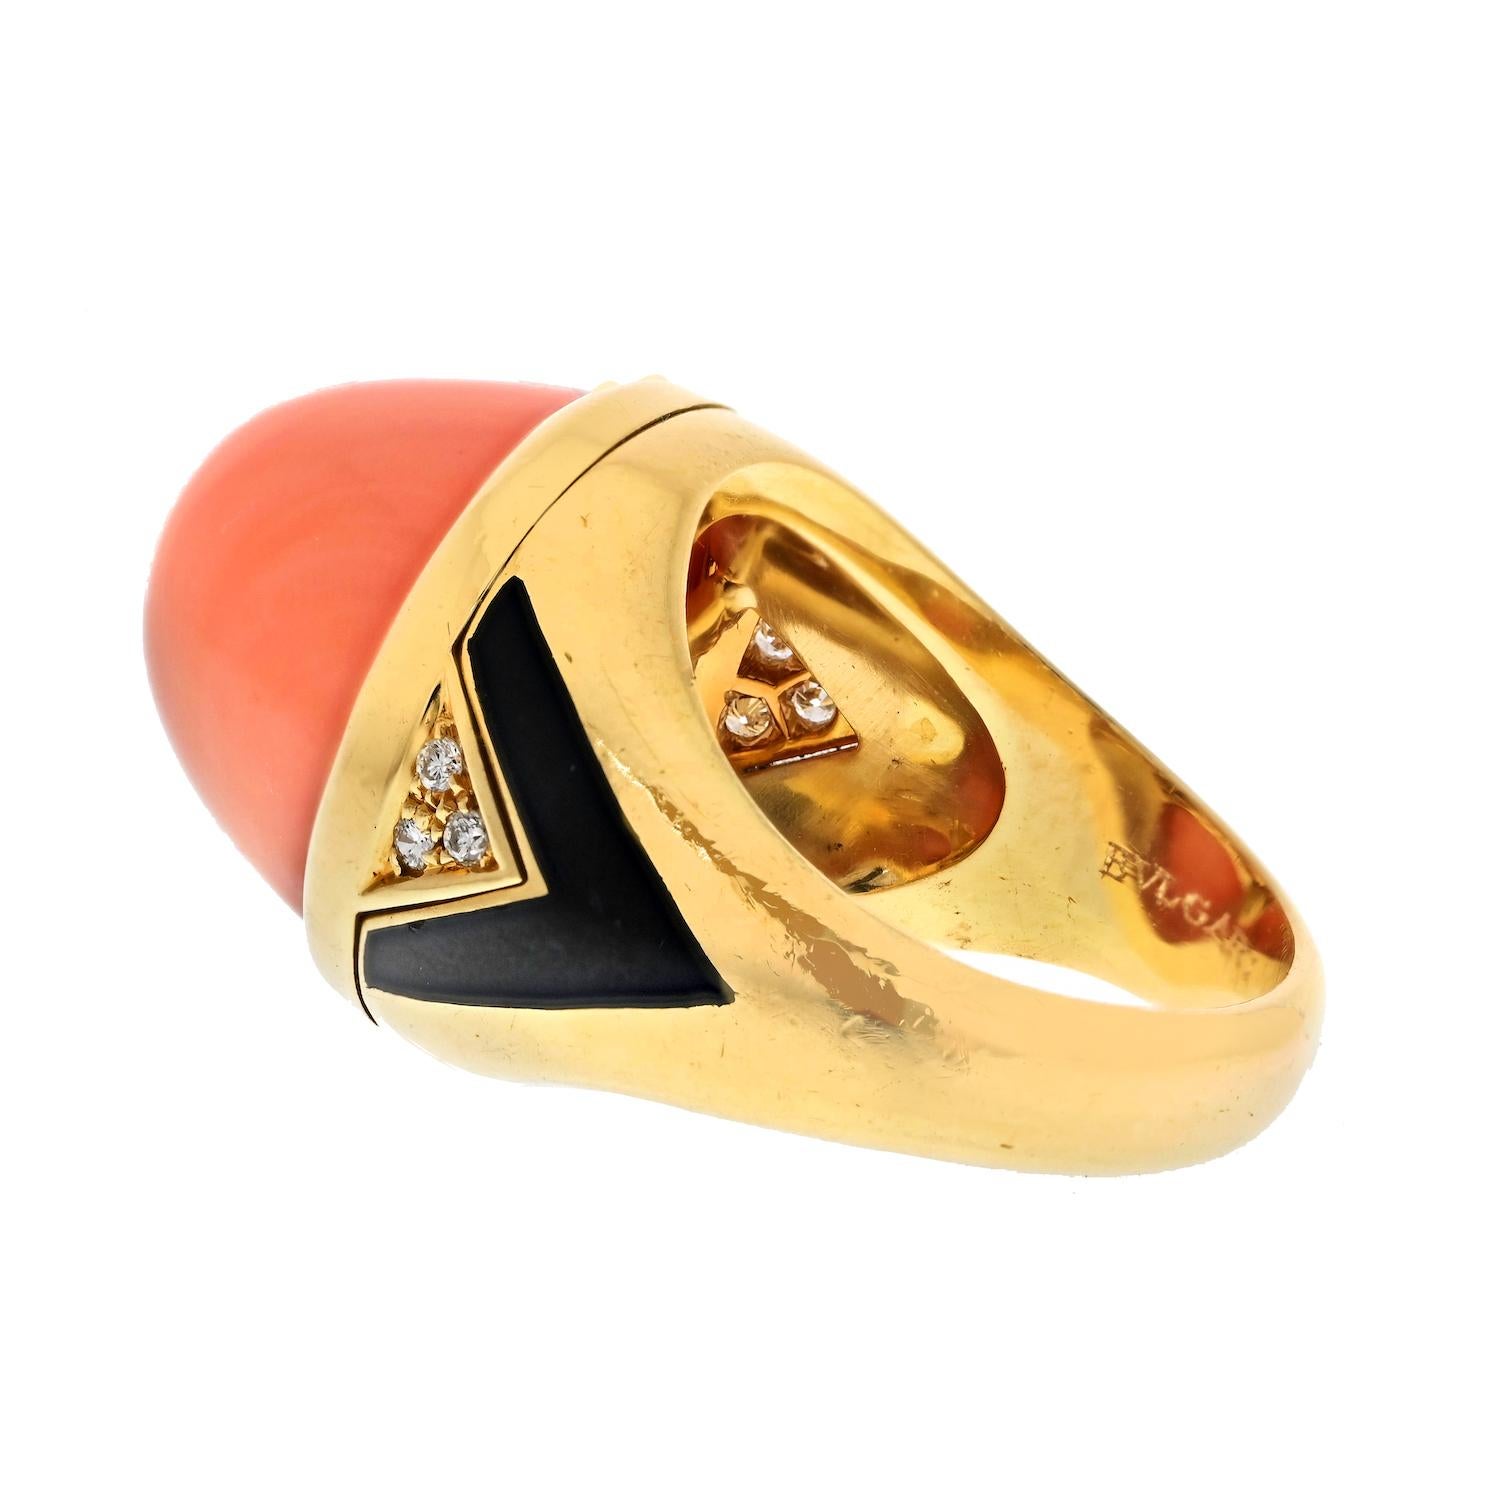 Cabochon Bvlgari Bombe 18k Yellow Gold Polished Coral Enamel Ring For Sale